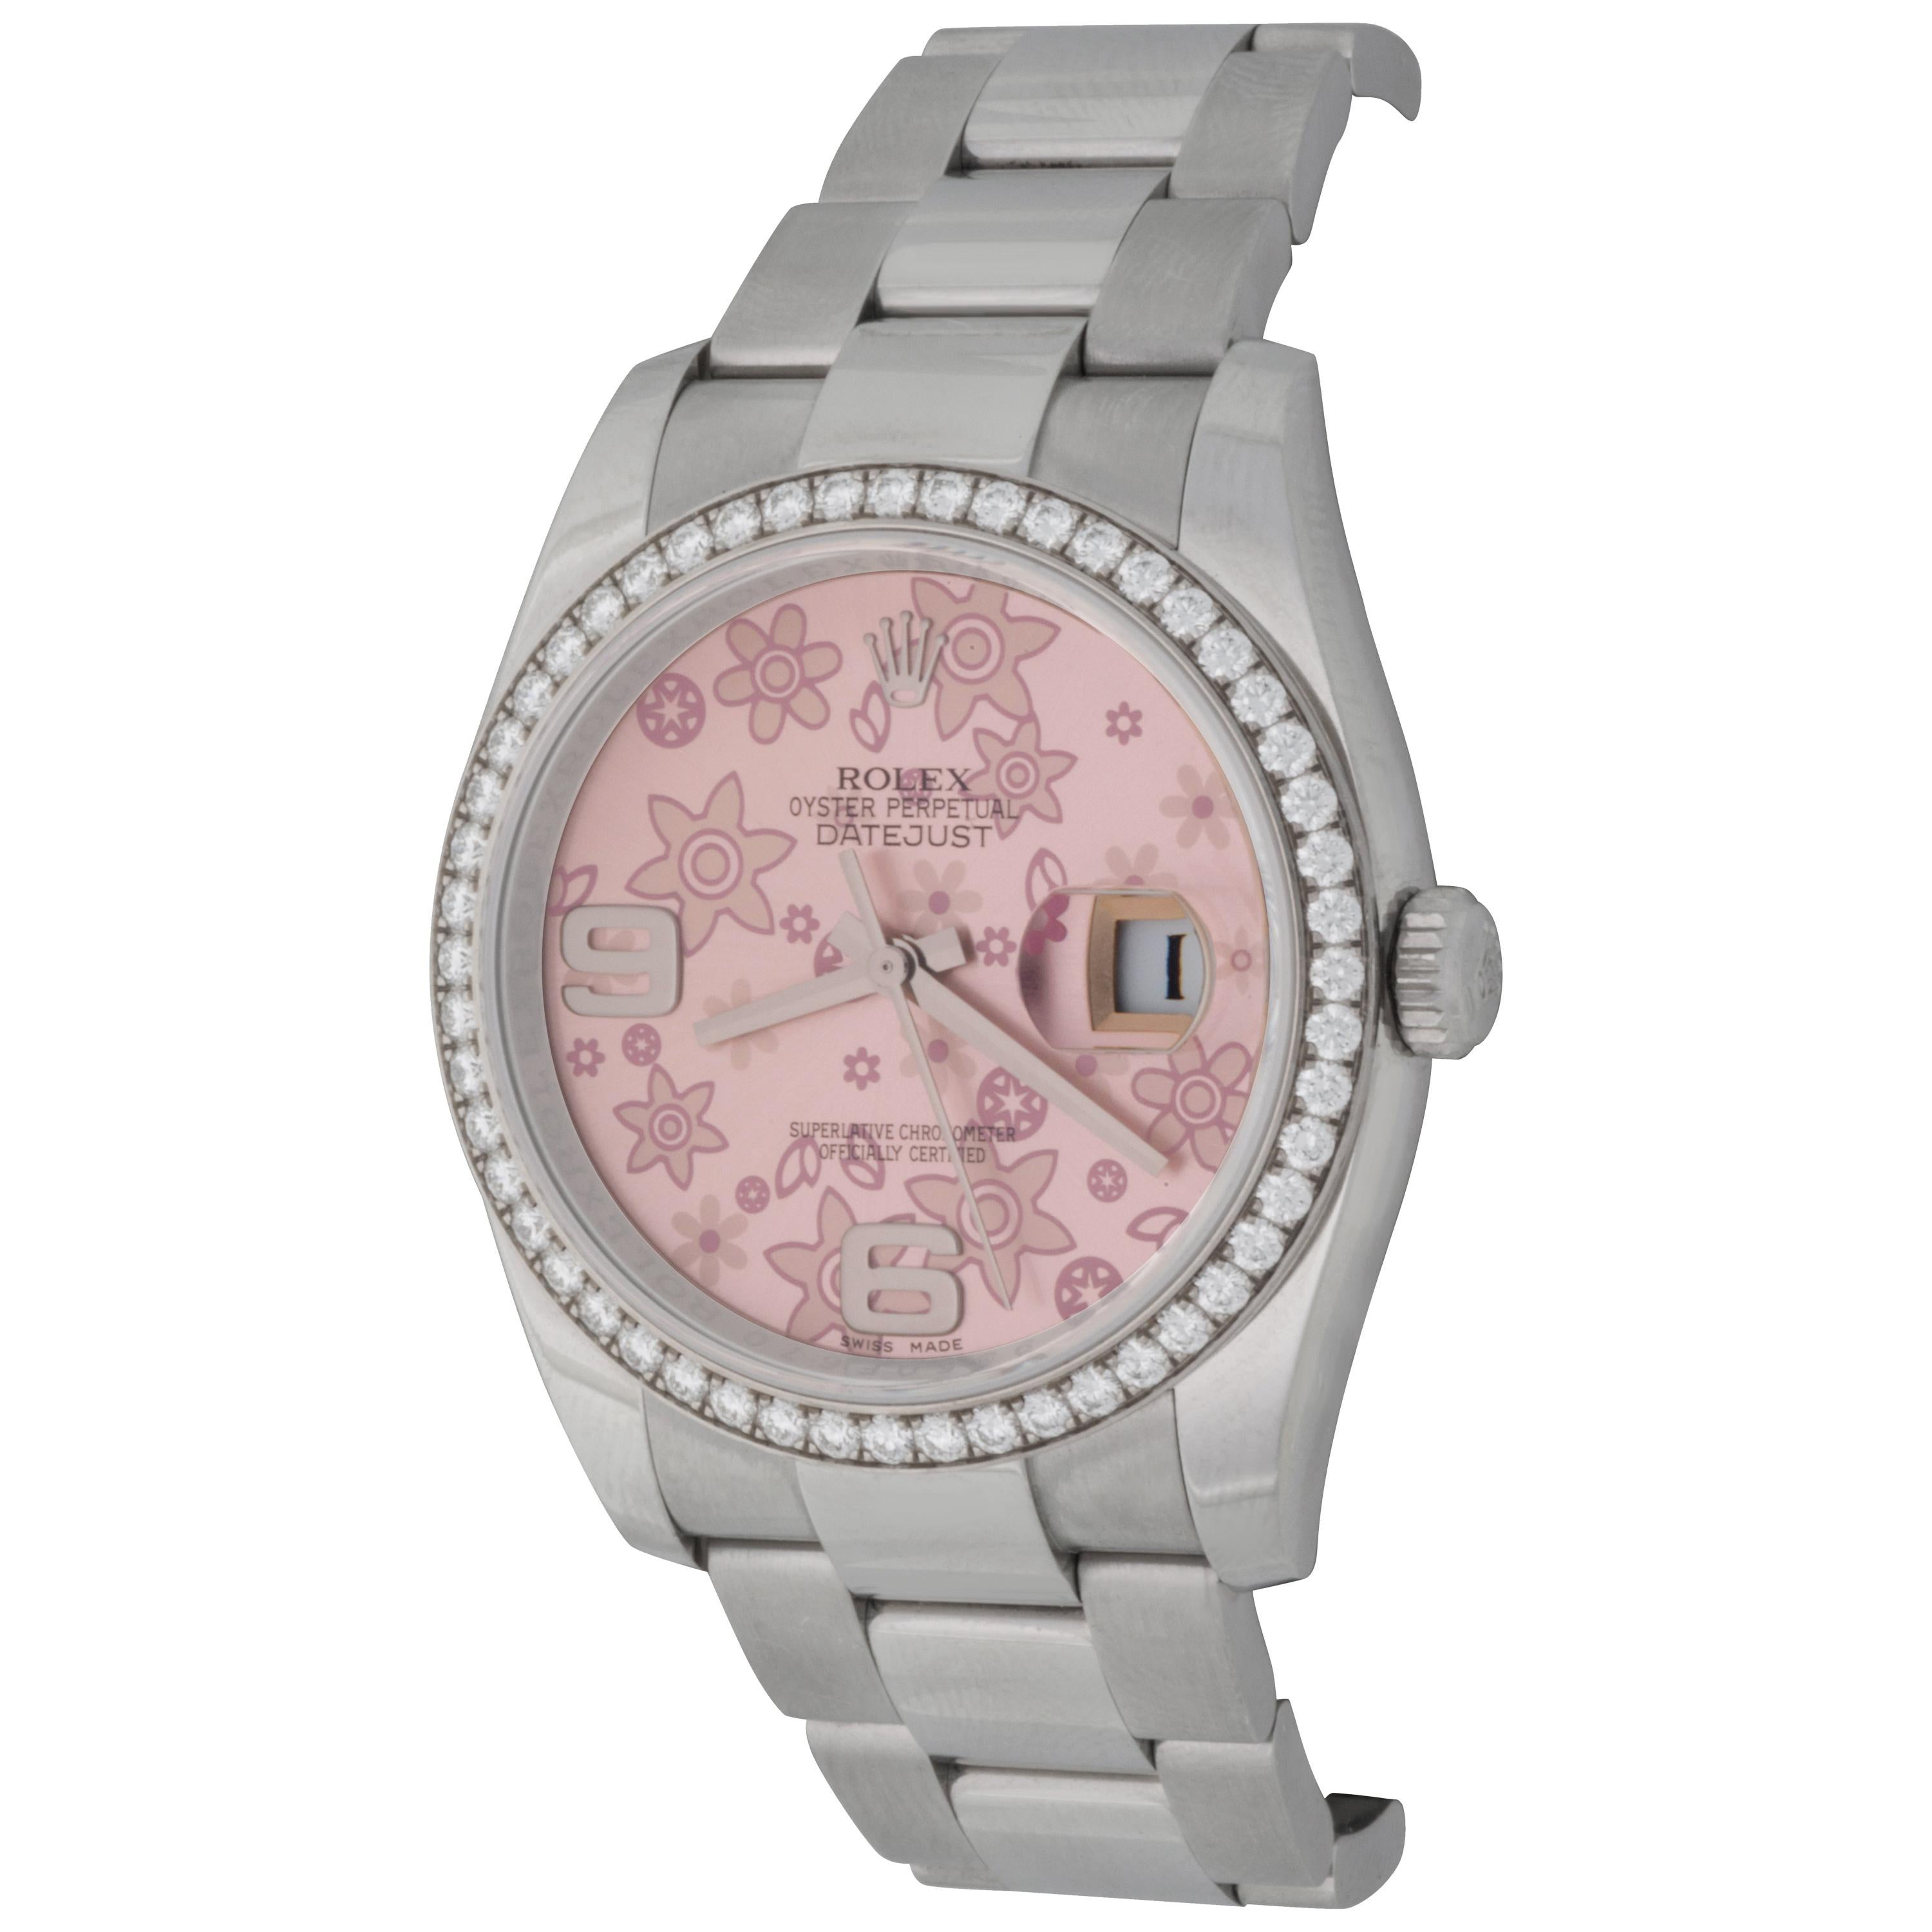 Rolex Pink Flowers Stainless Steel Datejust Automatic Wristwatch Ref 116244 For Sale